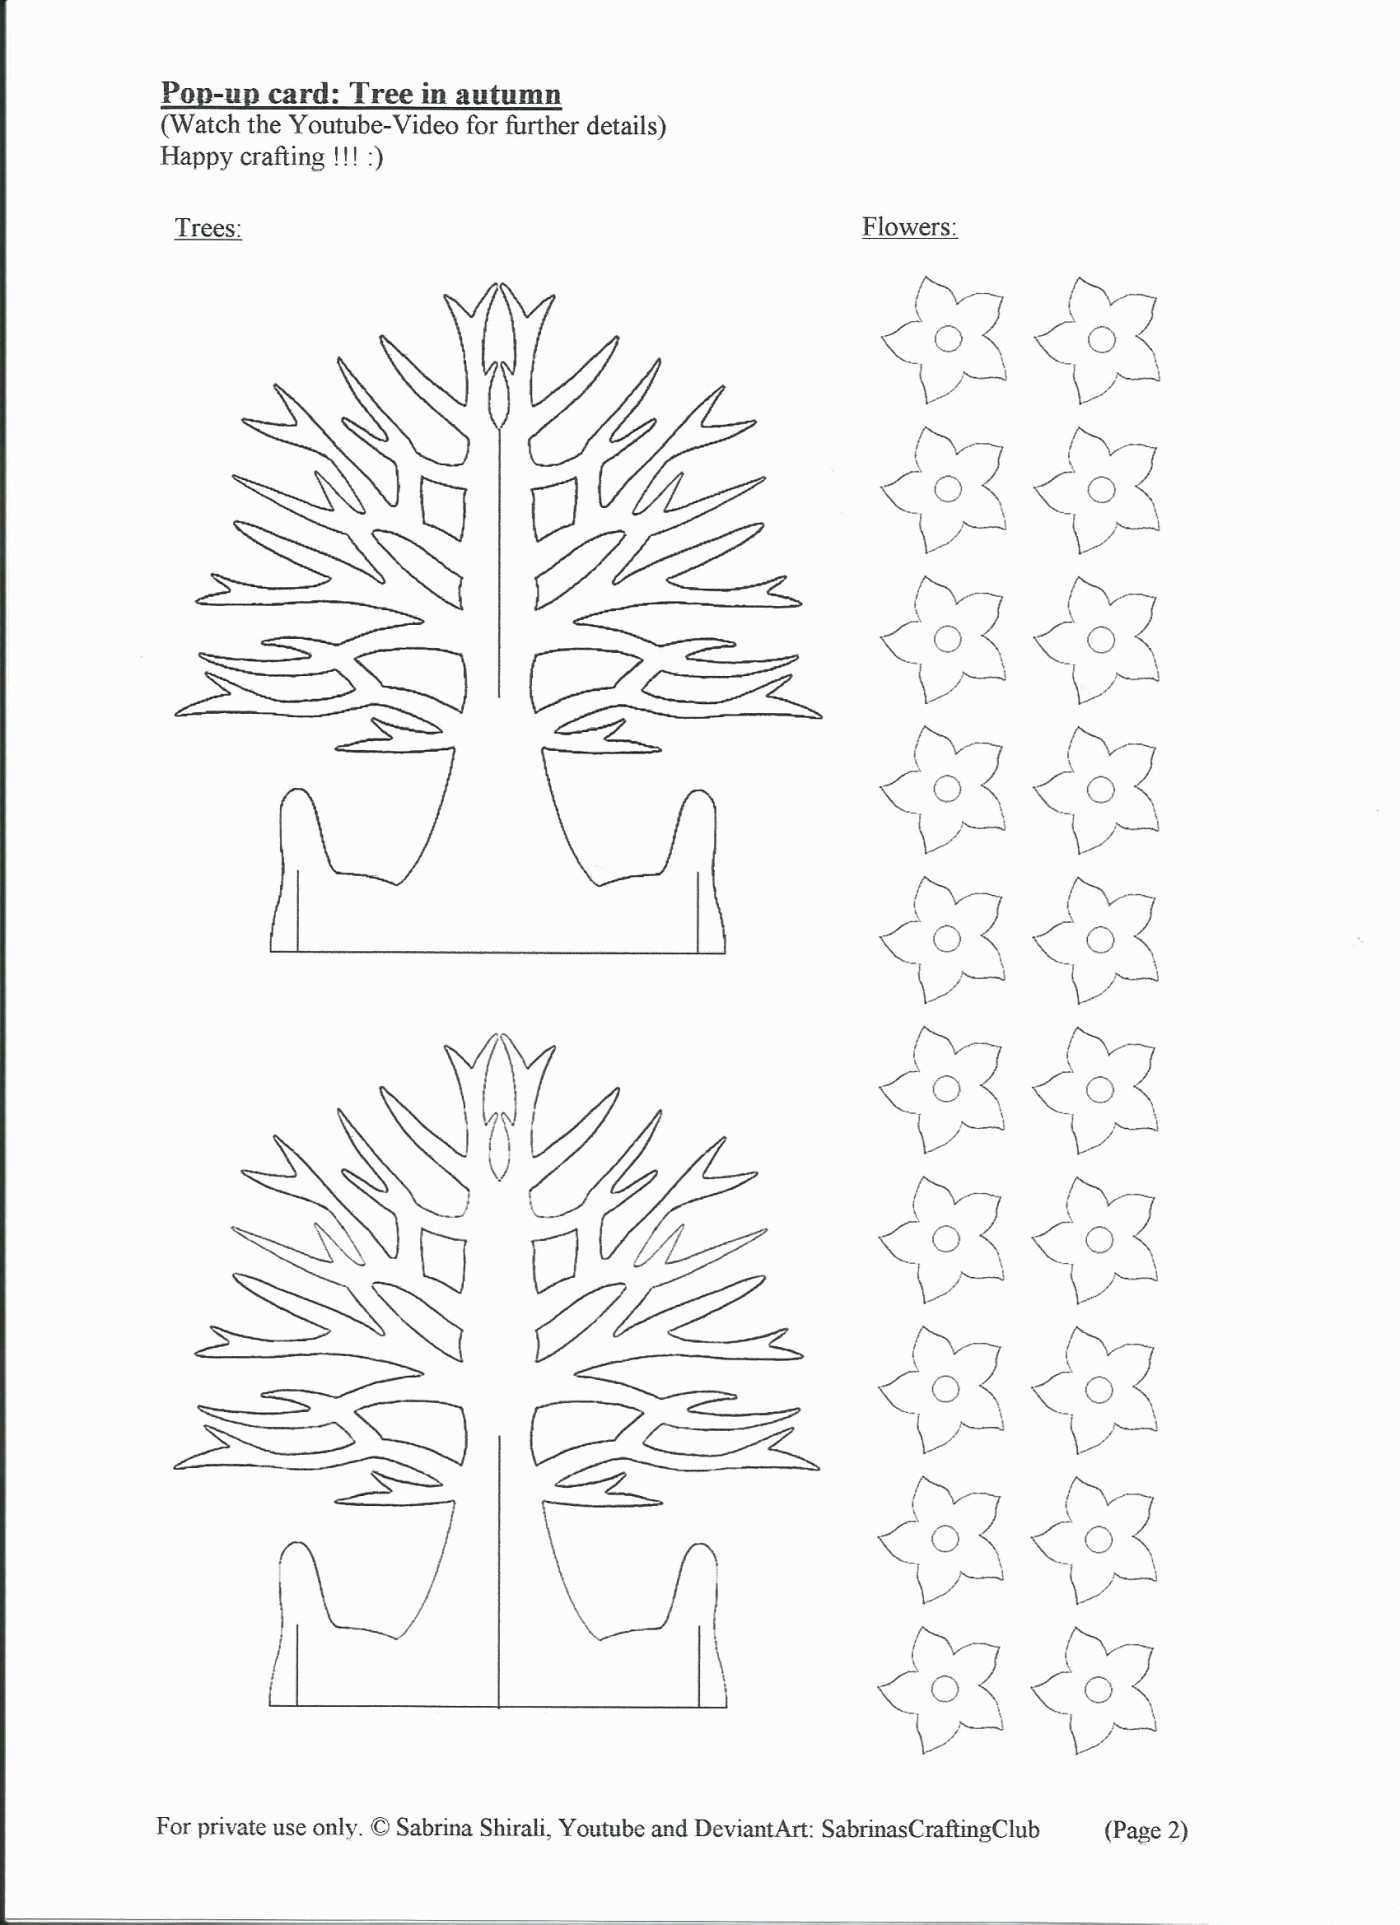 72 Free Printable Pop Up Card Templates Tree For Freepop Pertaining To Printable Pop Up Card Templates Free